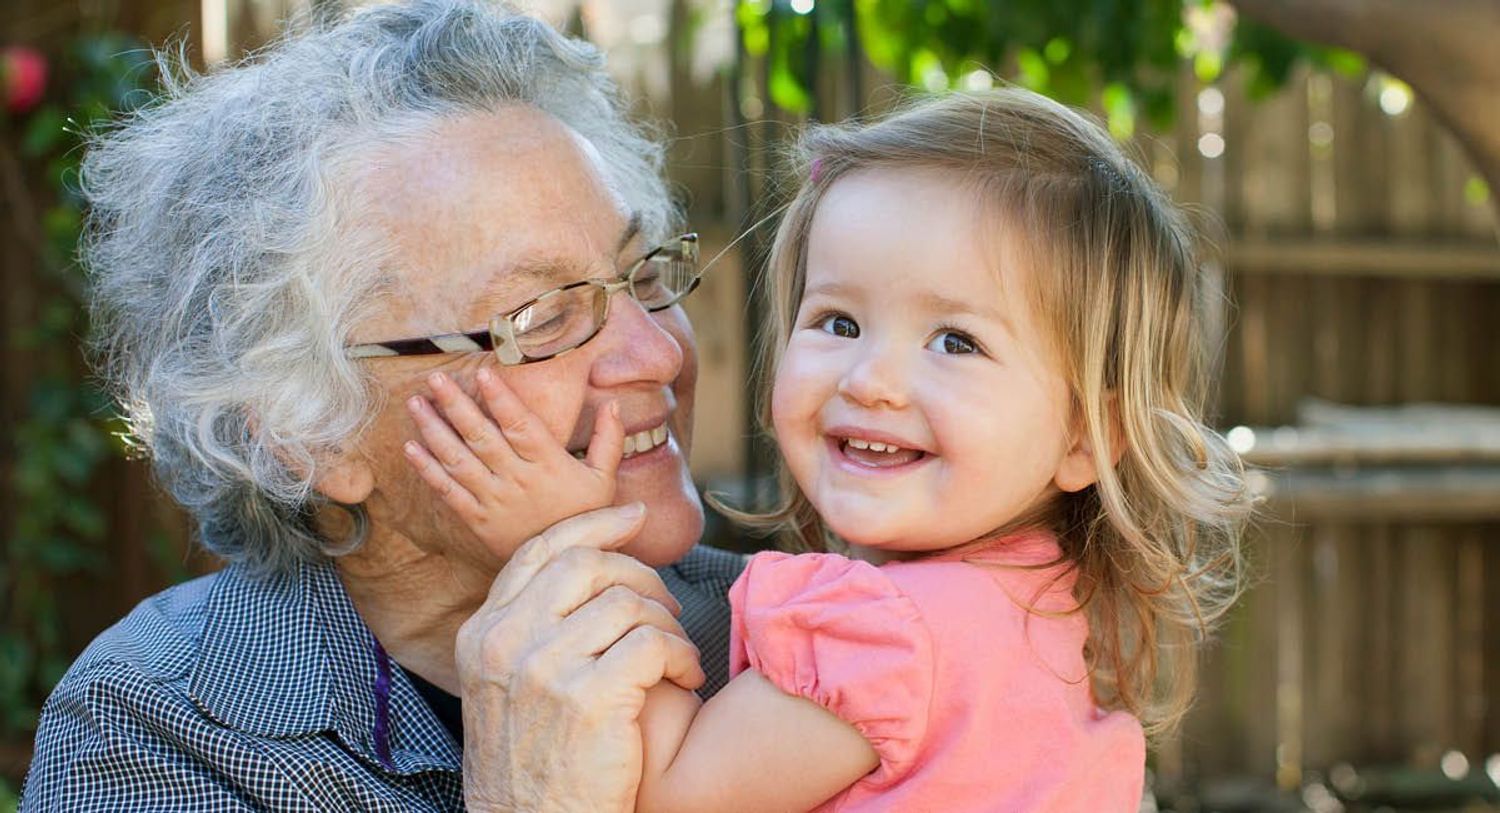 Grandmother and granddaughter smiling and showing affection for each other